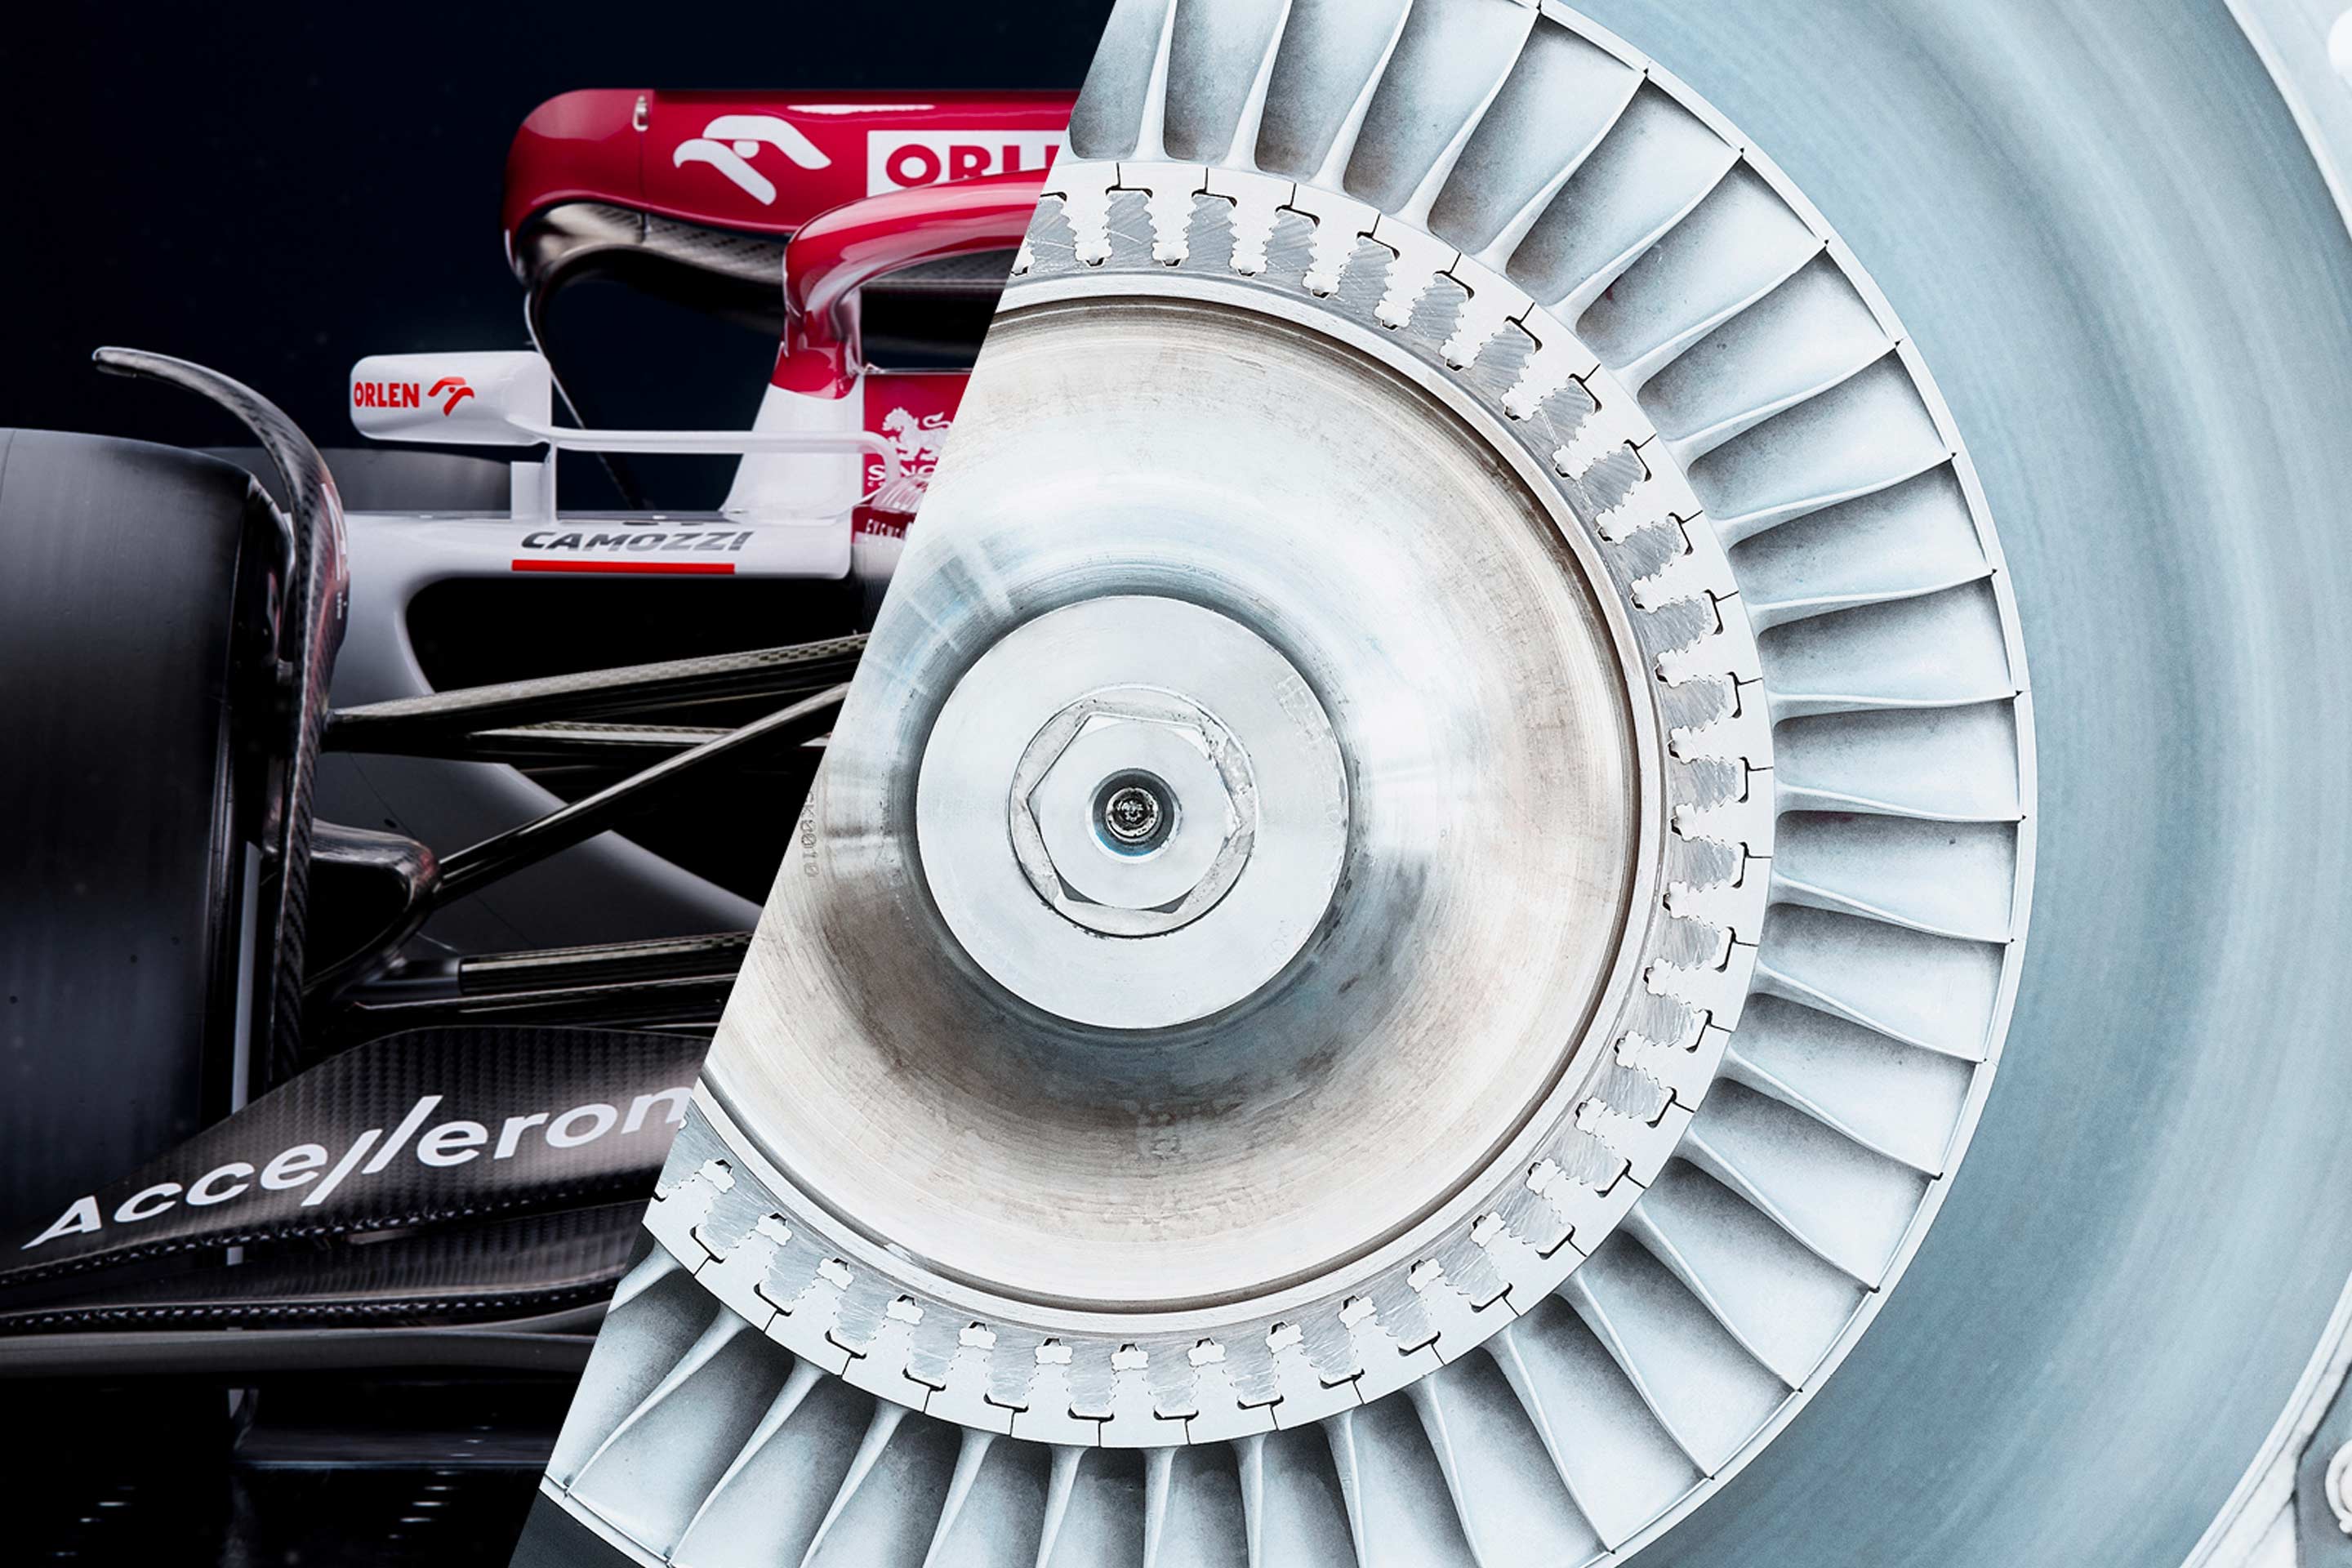 An image of a turbocharger, highlighting innovation in F1